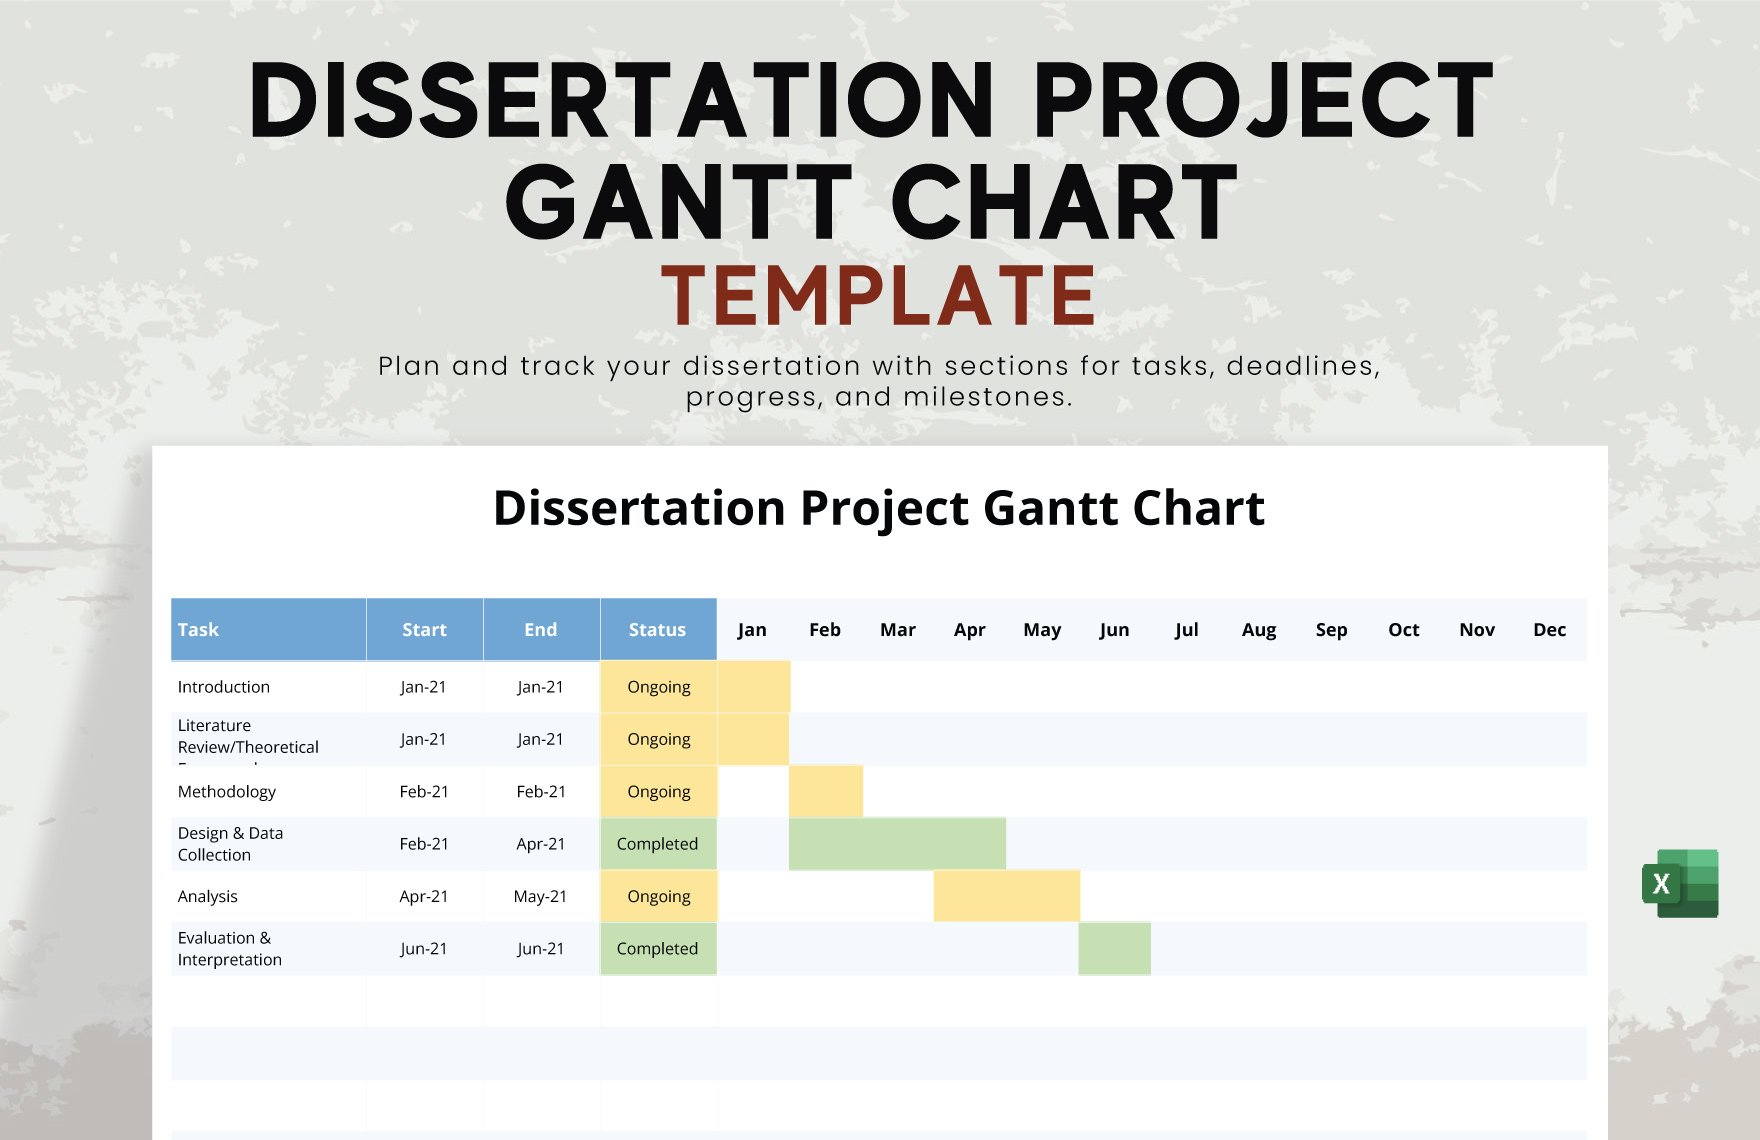 Dissertation Project Gantt Chart Template in Excel